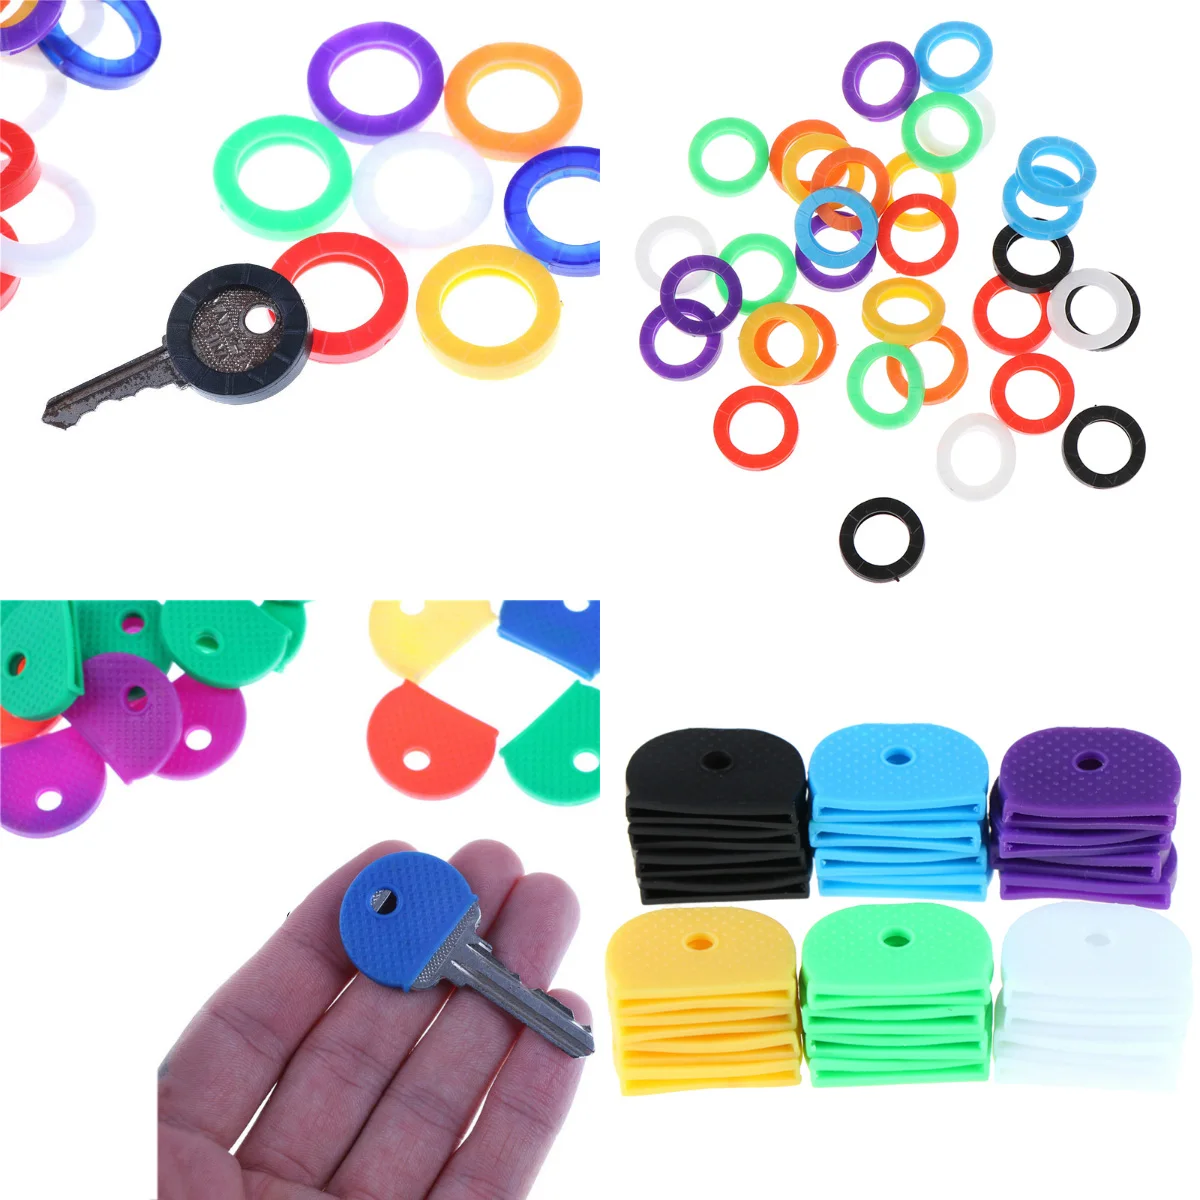 

24/32Pcs Colorful Key Top Covers Head/Caps/Tags/ID Markers Mixed Toppers Keyring Accessories